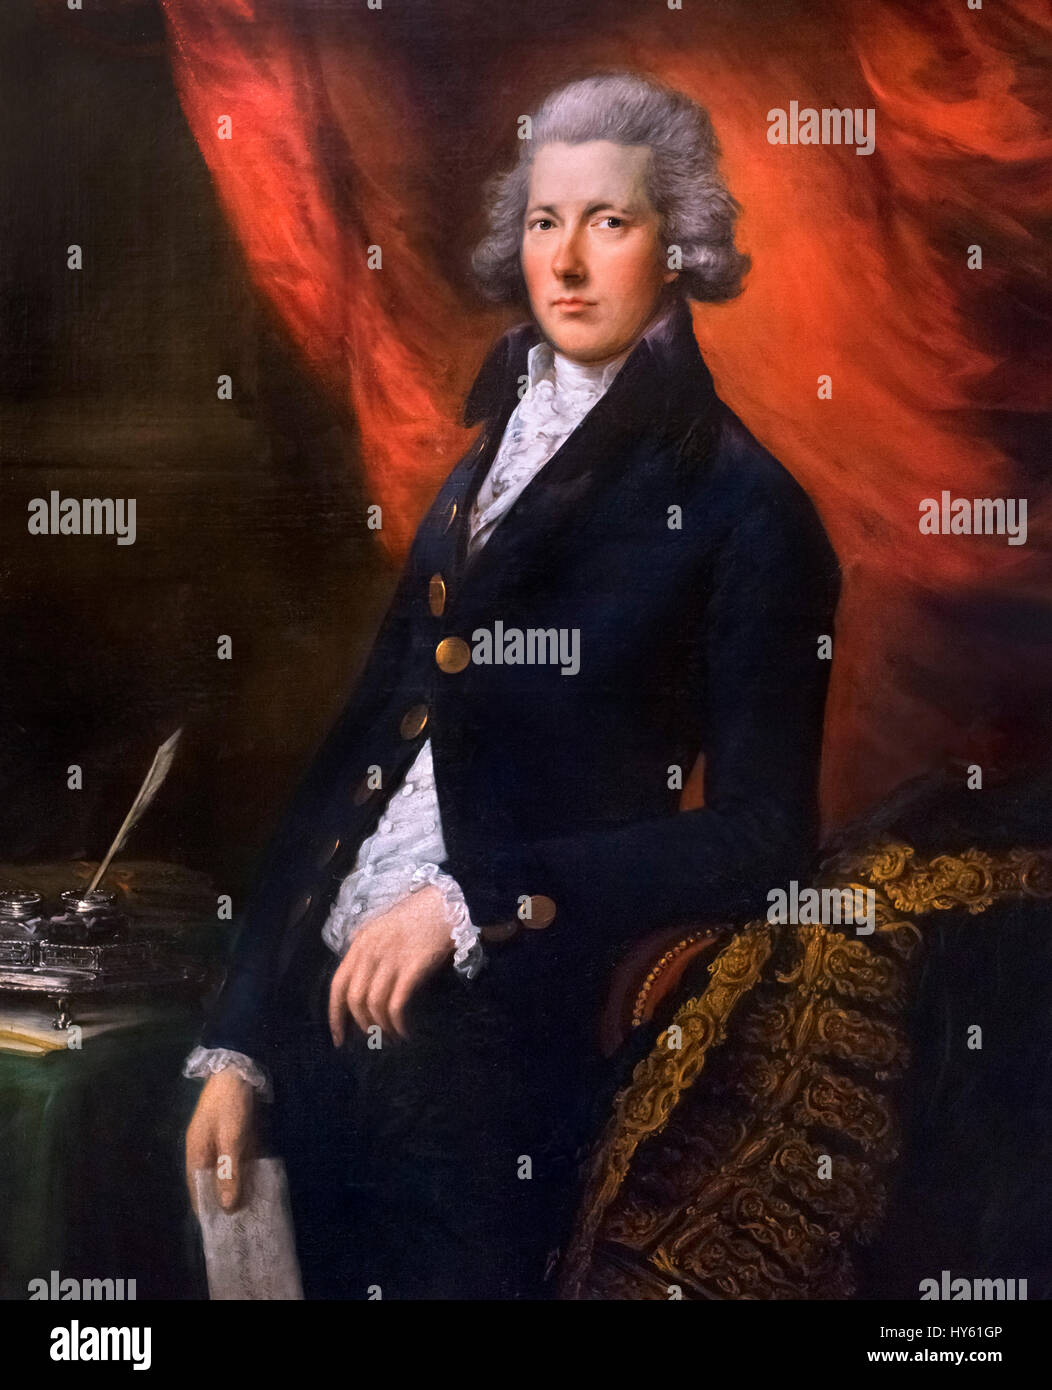 William Pitt the Younger, British Prime Minister at the end of the 18th and beginning of 19th centuries. Portrait by Thomas Gainsborough, c.1787-90 Stock Photo